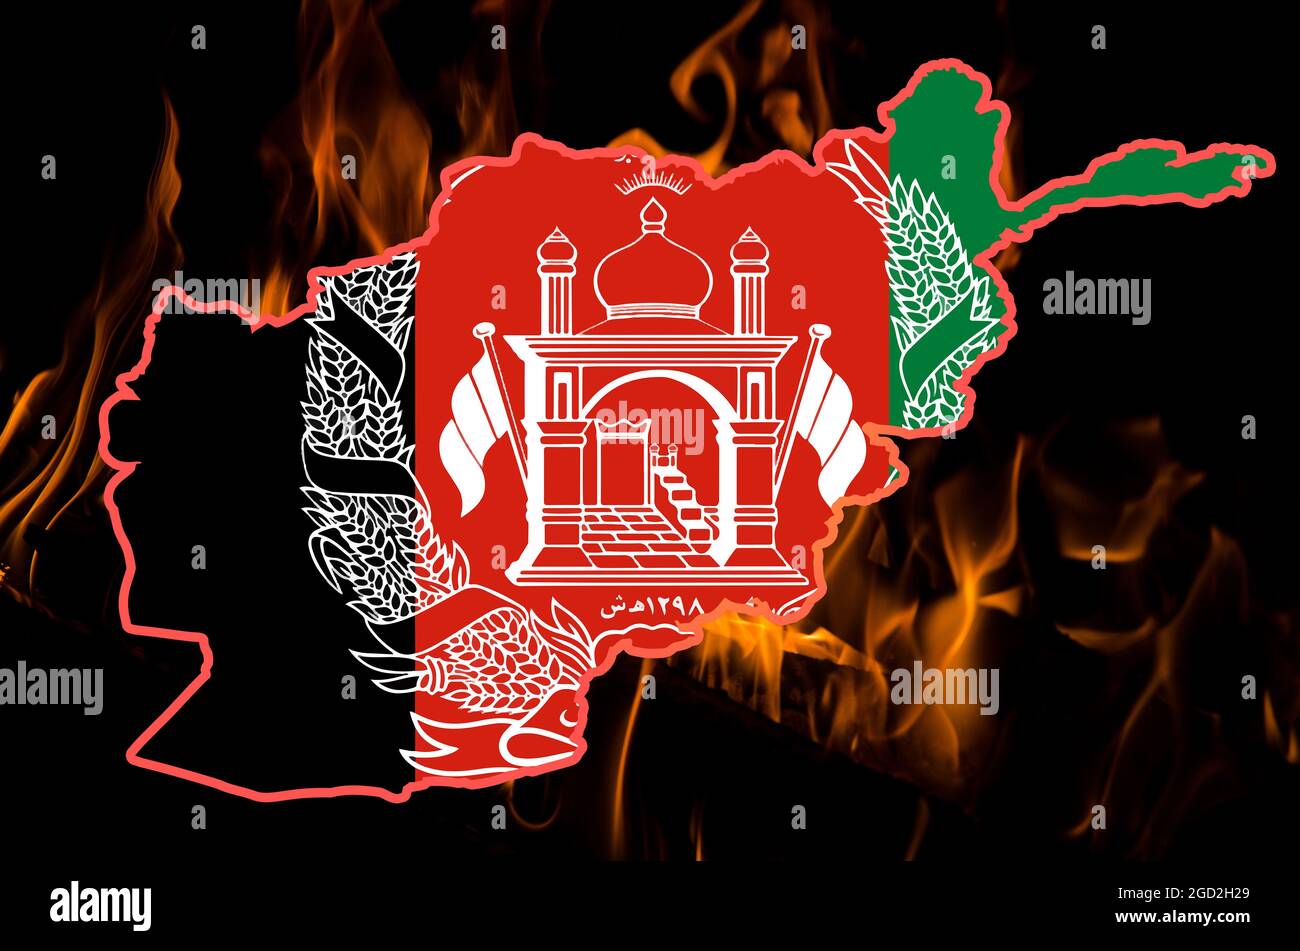 Afghanistan flag and outline map on the background of burning fire. Afghanistan problem concept. Stock Photo